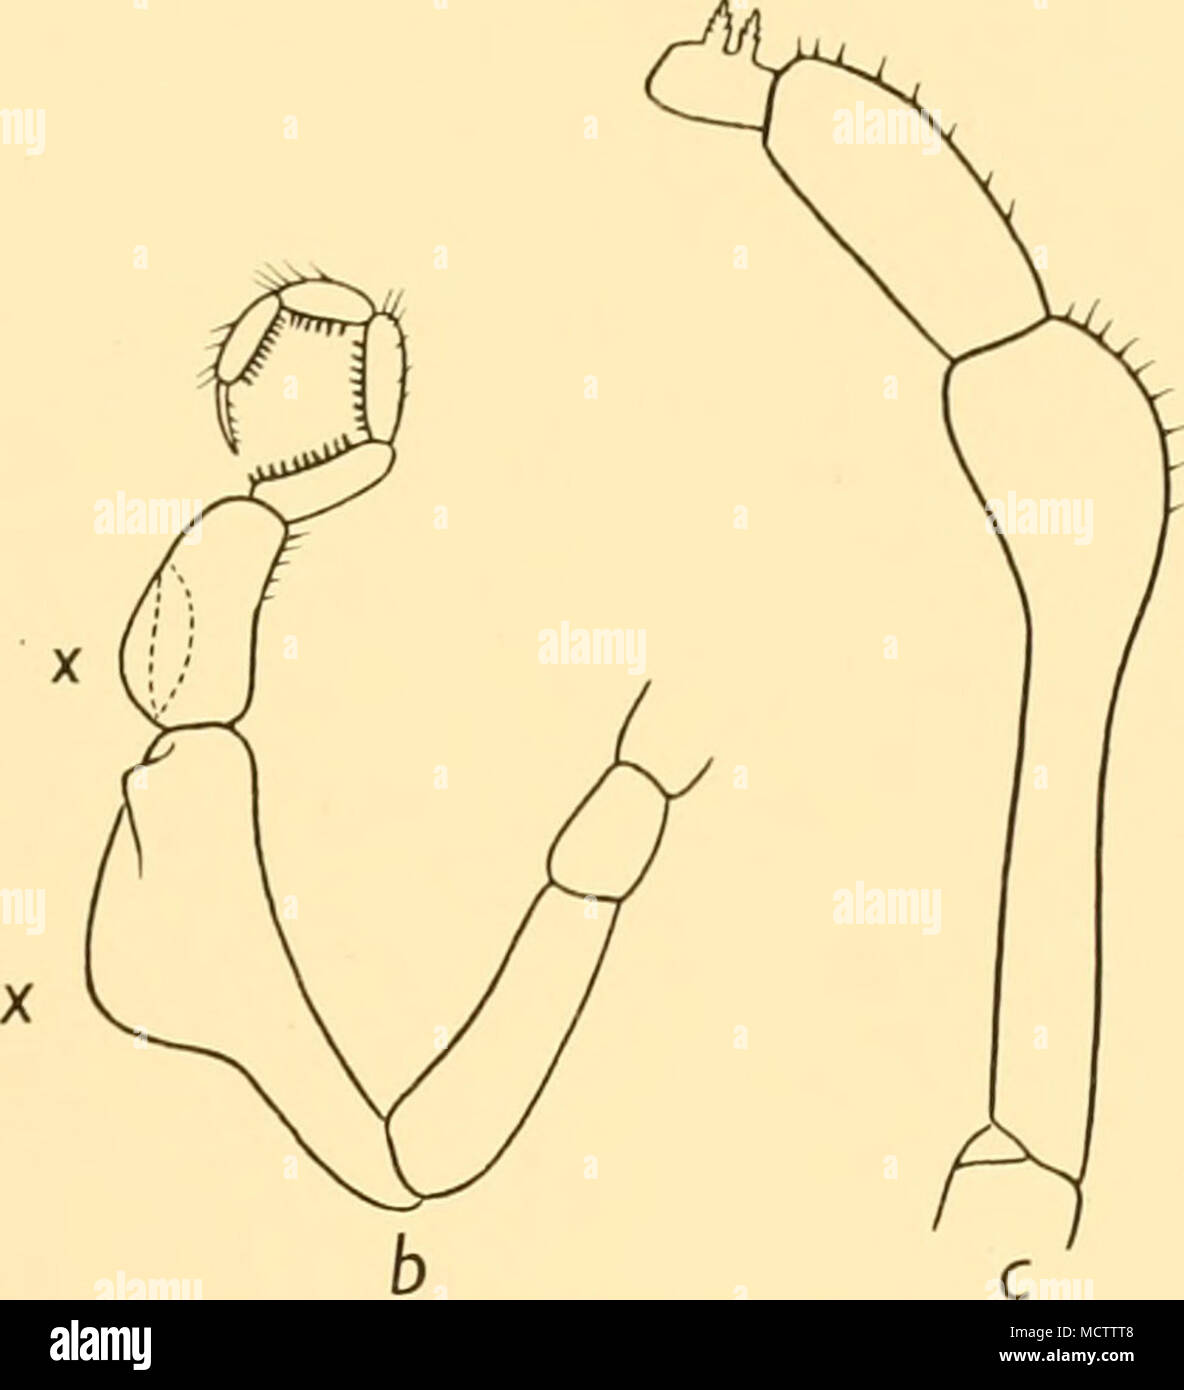 . Fig. 26. Male oviger of: a. Nymphon orcadense, Hodgson: X17. b. N. attstrale, Hodgson: x 17. Type H a; segments 5 and 6 thin-walled and inflated at x. c. Segments 5-7 of male oviger of A', brevicaudaium, Miers: &lt; 27. Distribution. Circumpolar; this is the first record of the typical australe form from the western side of the Antarctic (cf. Loman, 1923, p. 21). Nymphon orcadense, Hodgson (Fig. 26 a). Chaetonymphon orcadense, Hodgson, 1908, p. 173, pi. ii, figs. 2, 2 a. Chaetonymphon orcadense, Loman, 1923, p. 22. Nymphon orcadense. Caiman, 1920, p. 246. St. 163. 17. ii. 27. Paul Harbour, S Stock Photo